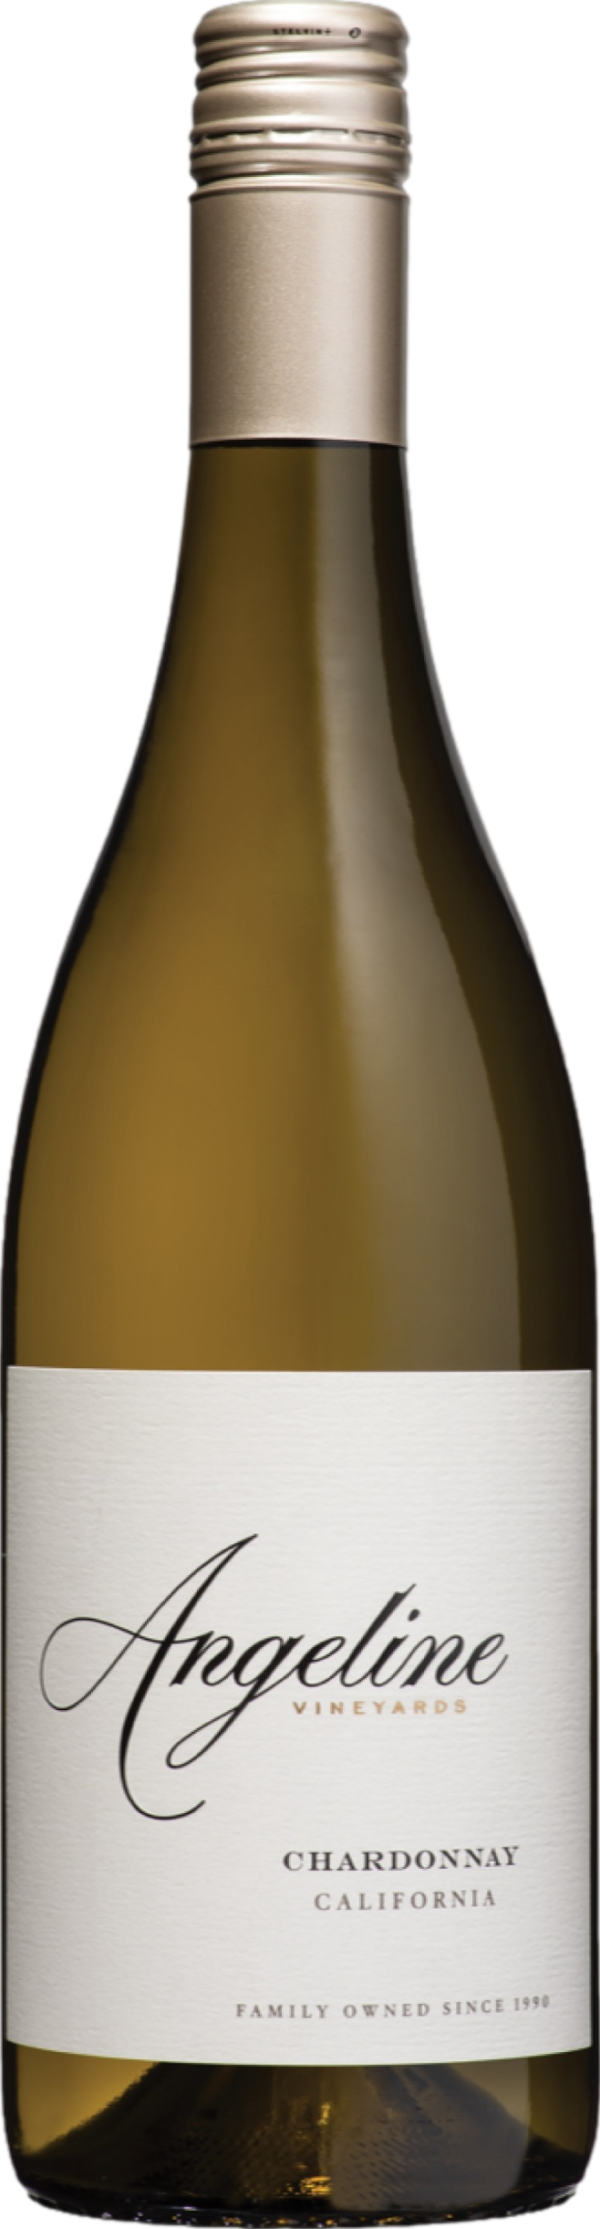 Product image of Angeline Chardonnay 2022 from 8wines